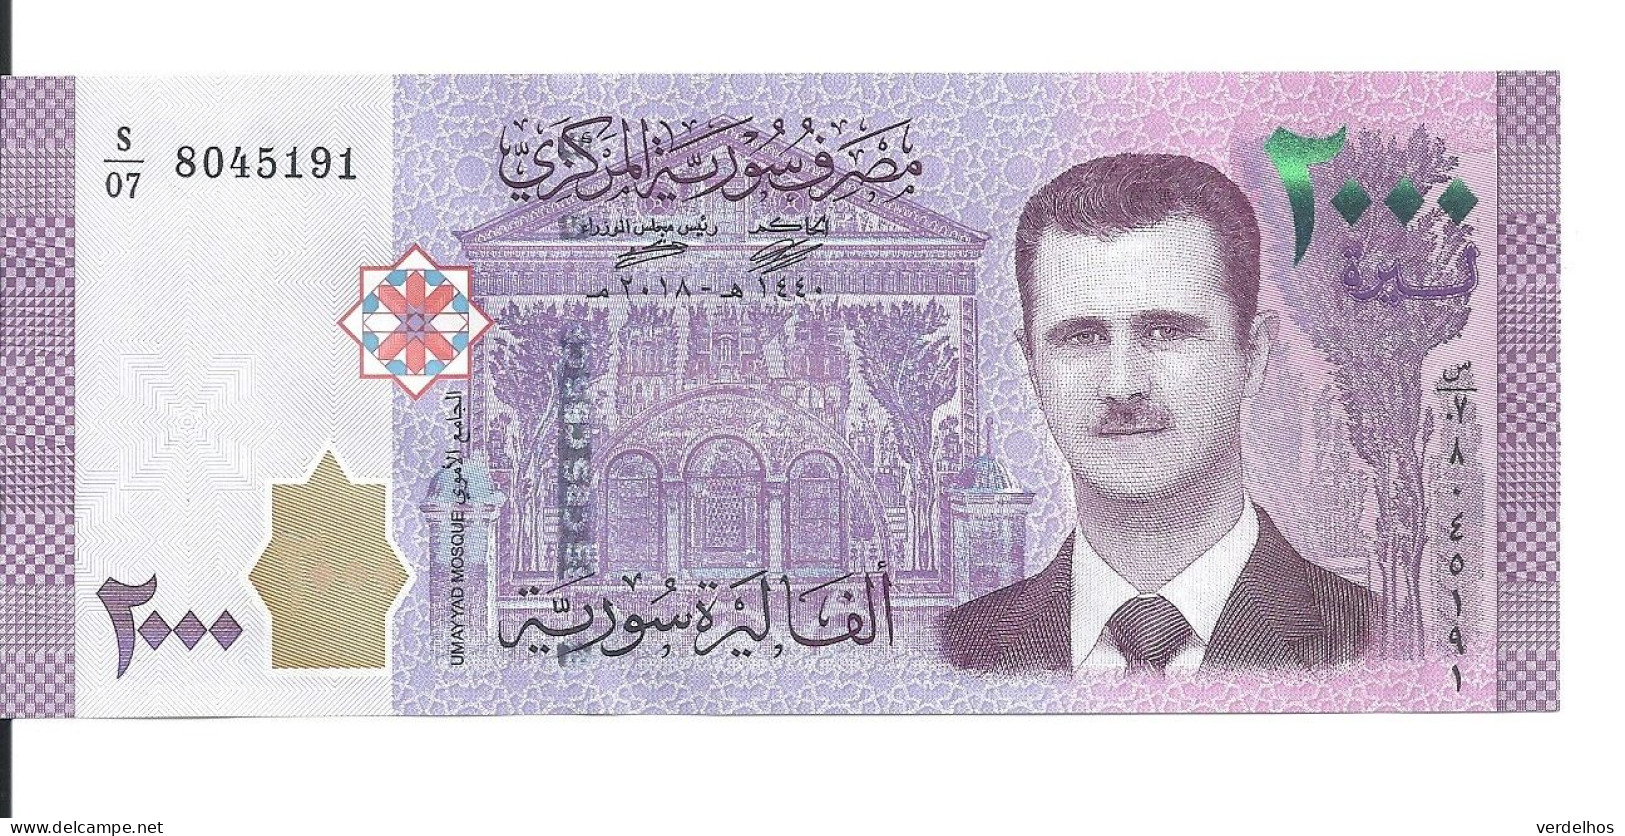 SYRIE 2000 POUNDS 2018 UNC P 117 C - Syria